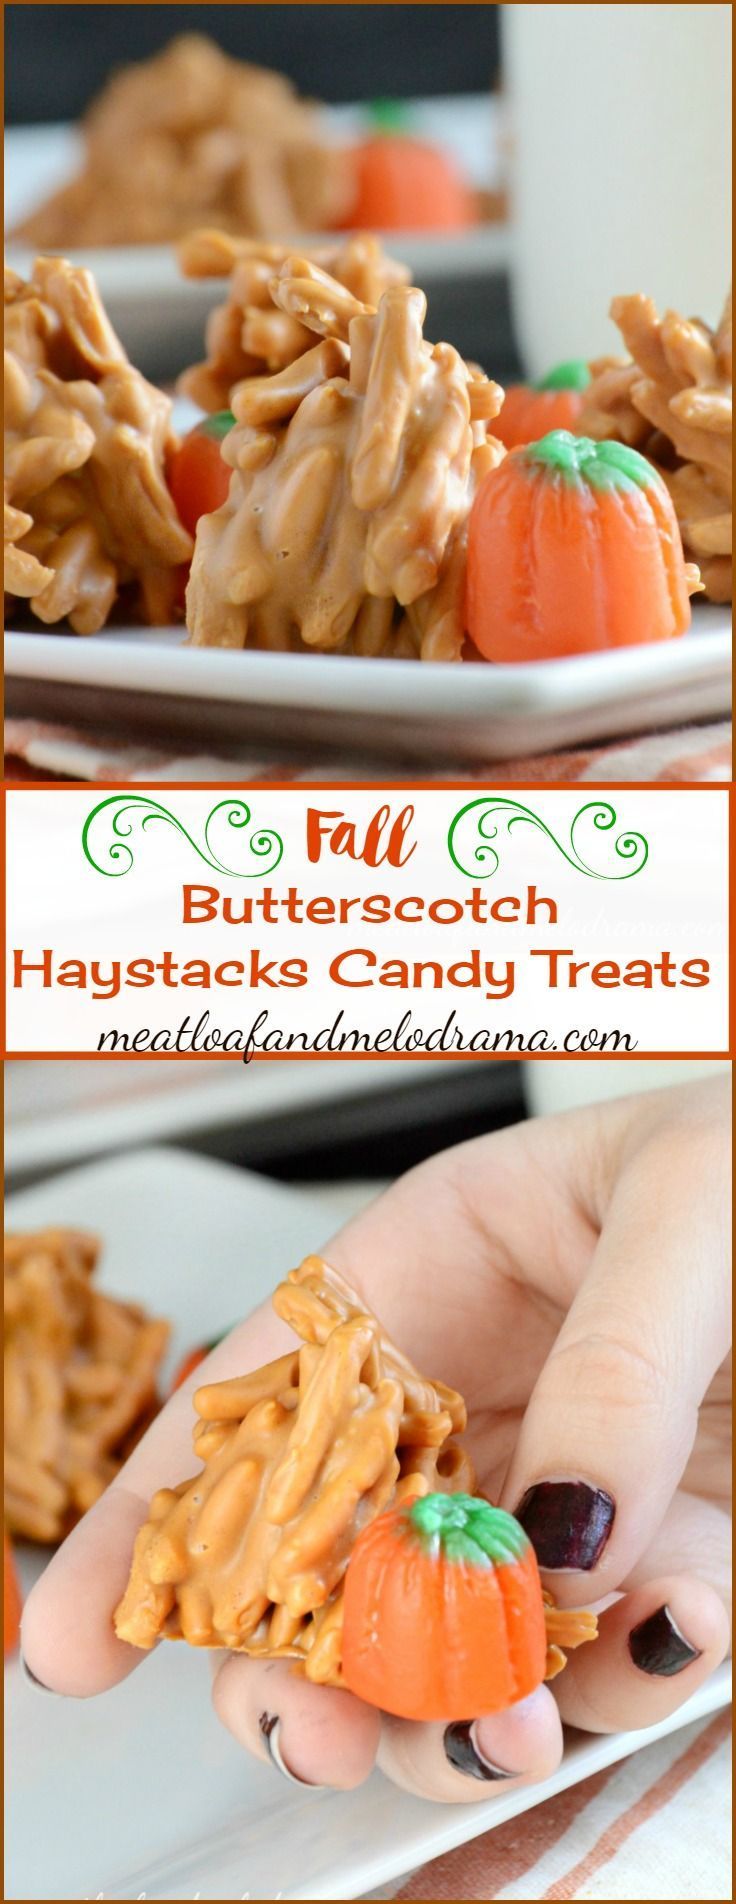 Butterscotch Haystacks Candy Treats are quick and easy to make and perfect for fall!l -   22 cute fall recipes
 ideas